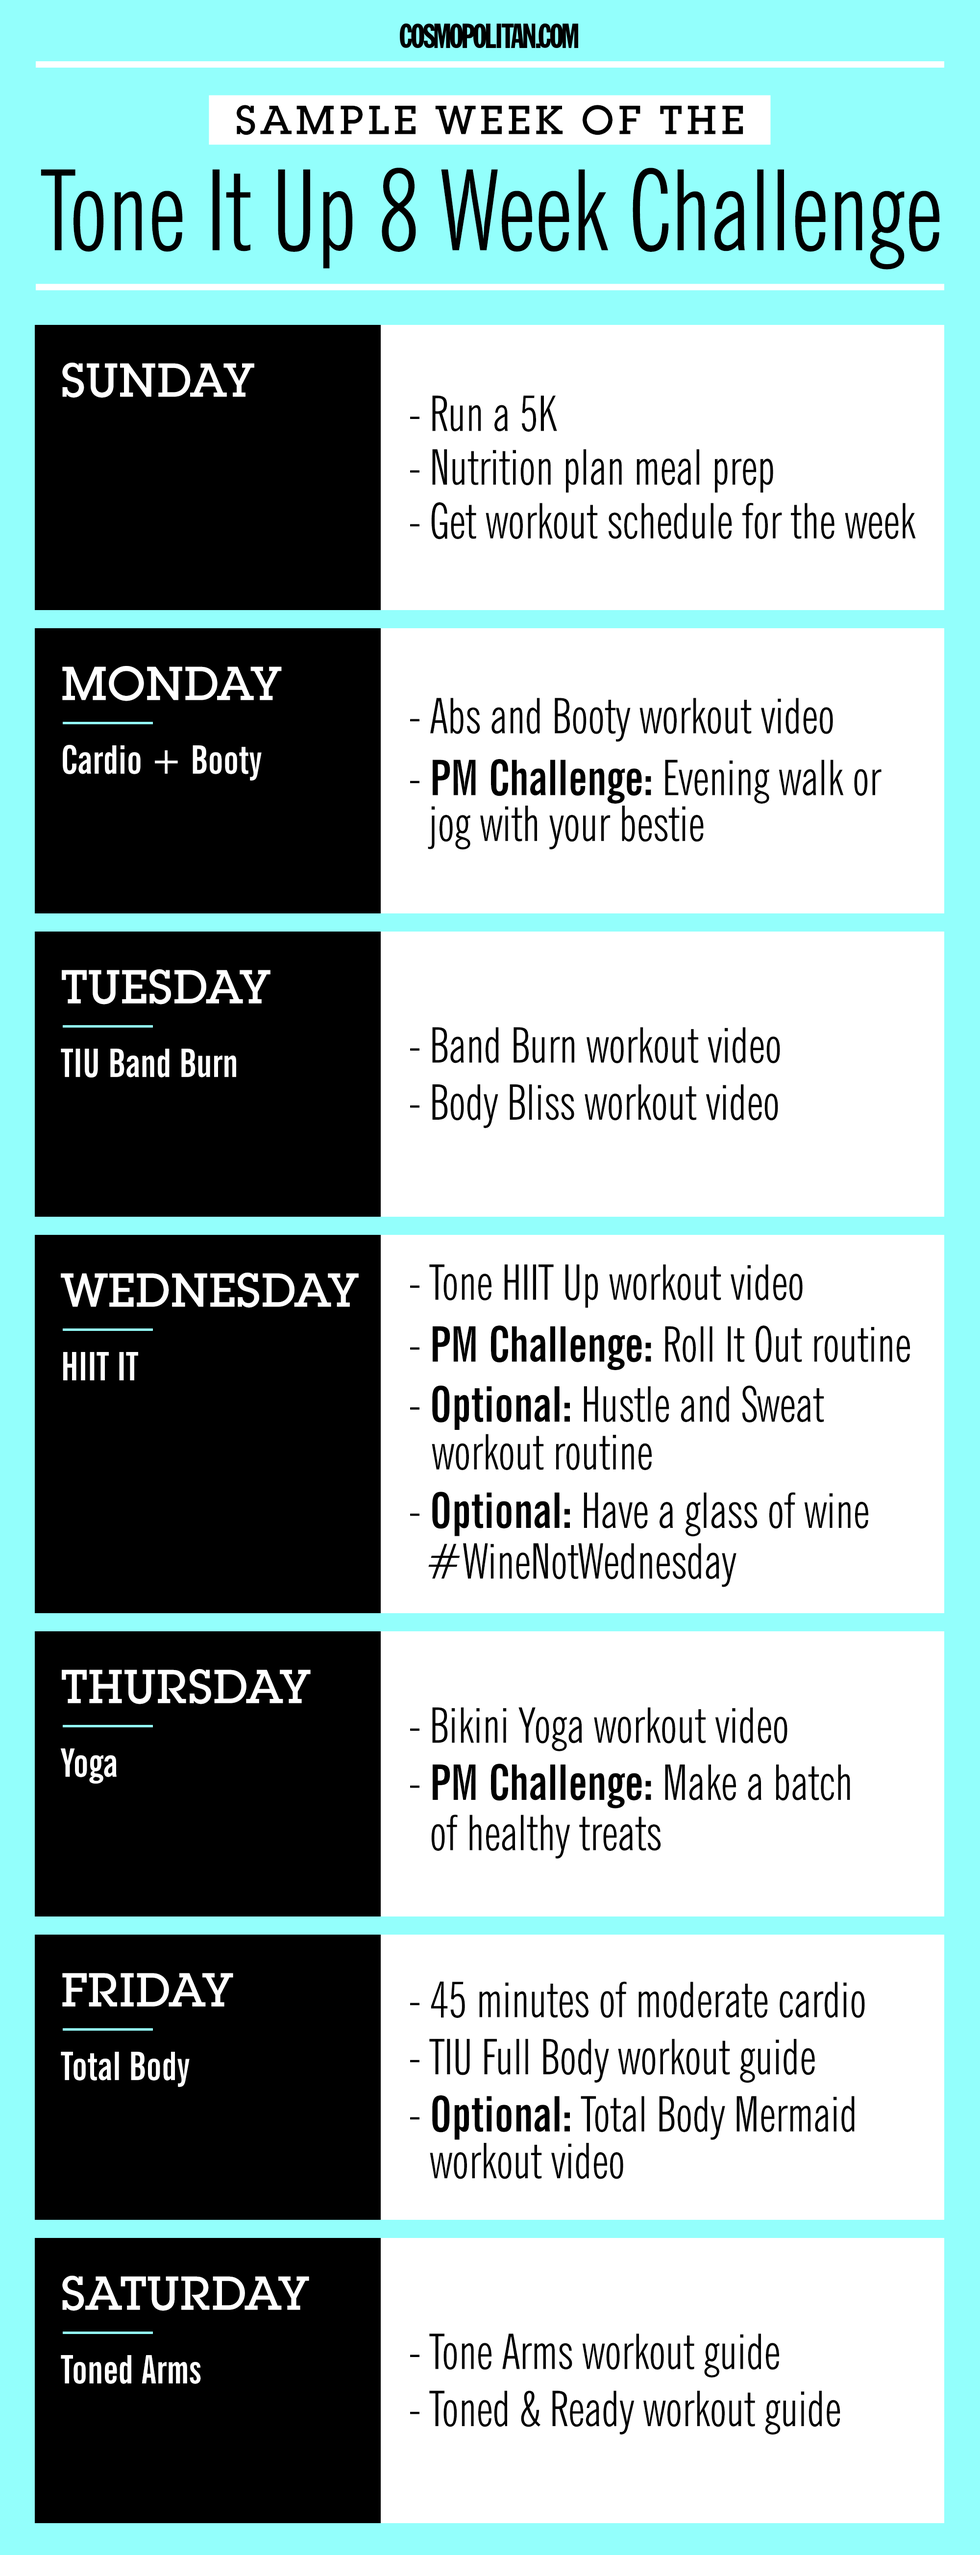 flyde Materialisme Ved navn Tone It Up Challenge Review - Instagram Fitness Workout Before and After